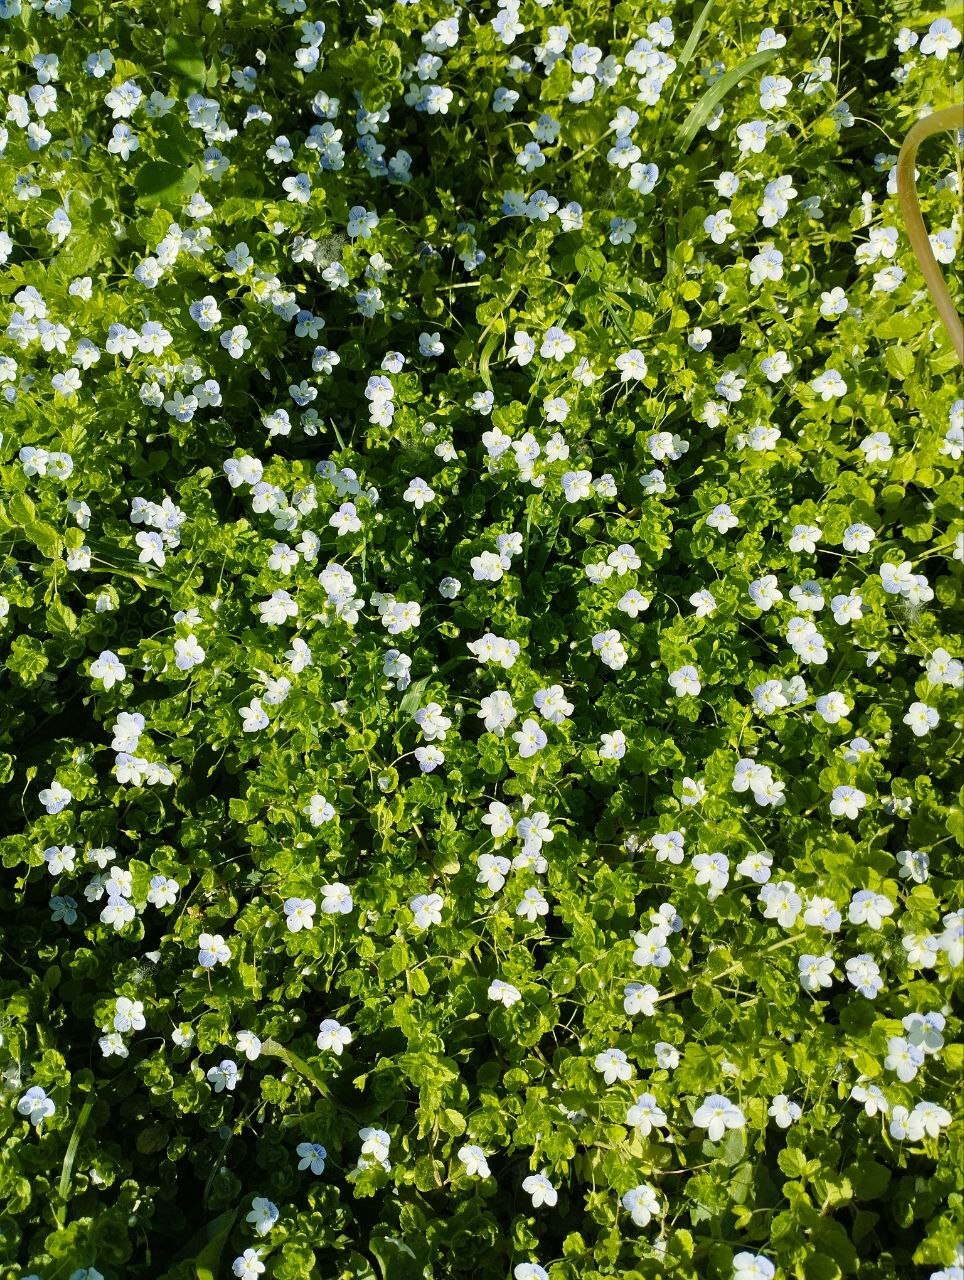 Very small flowers, less than a centimeter - Crossposting, Pikabu publish bot